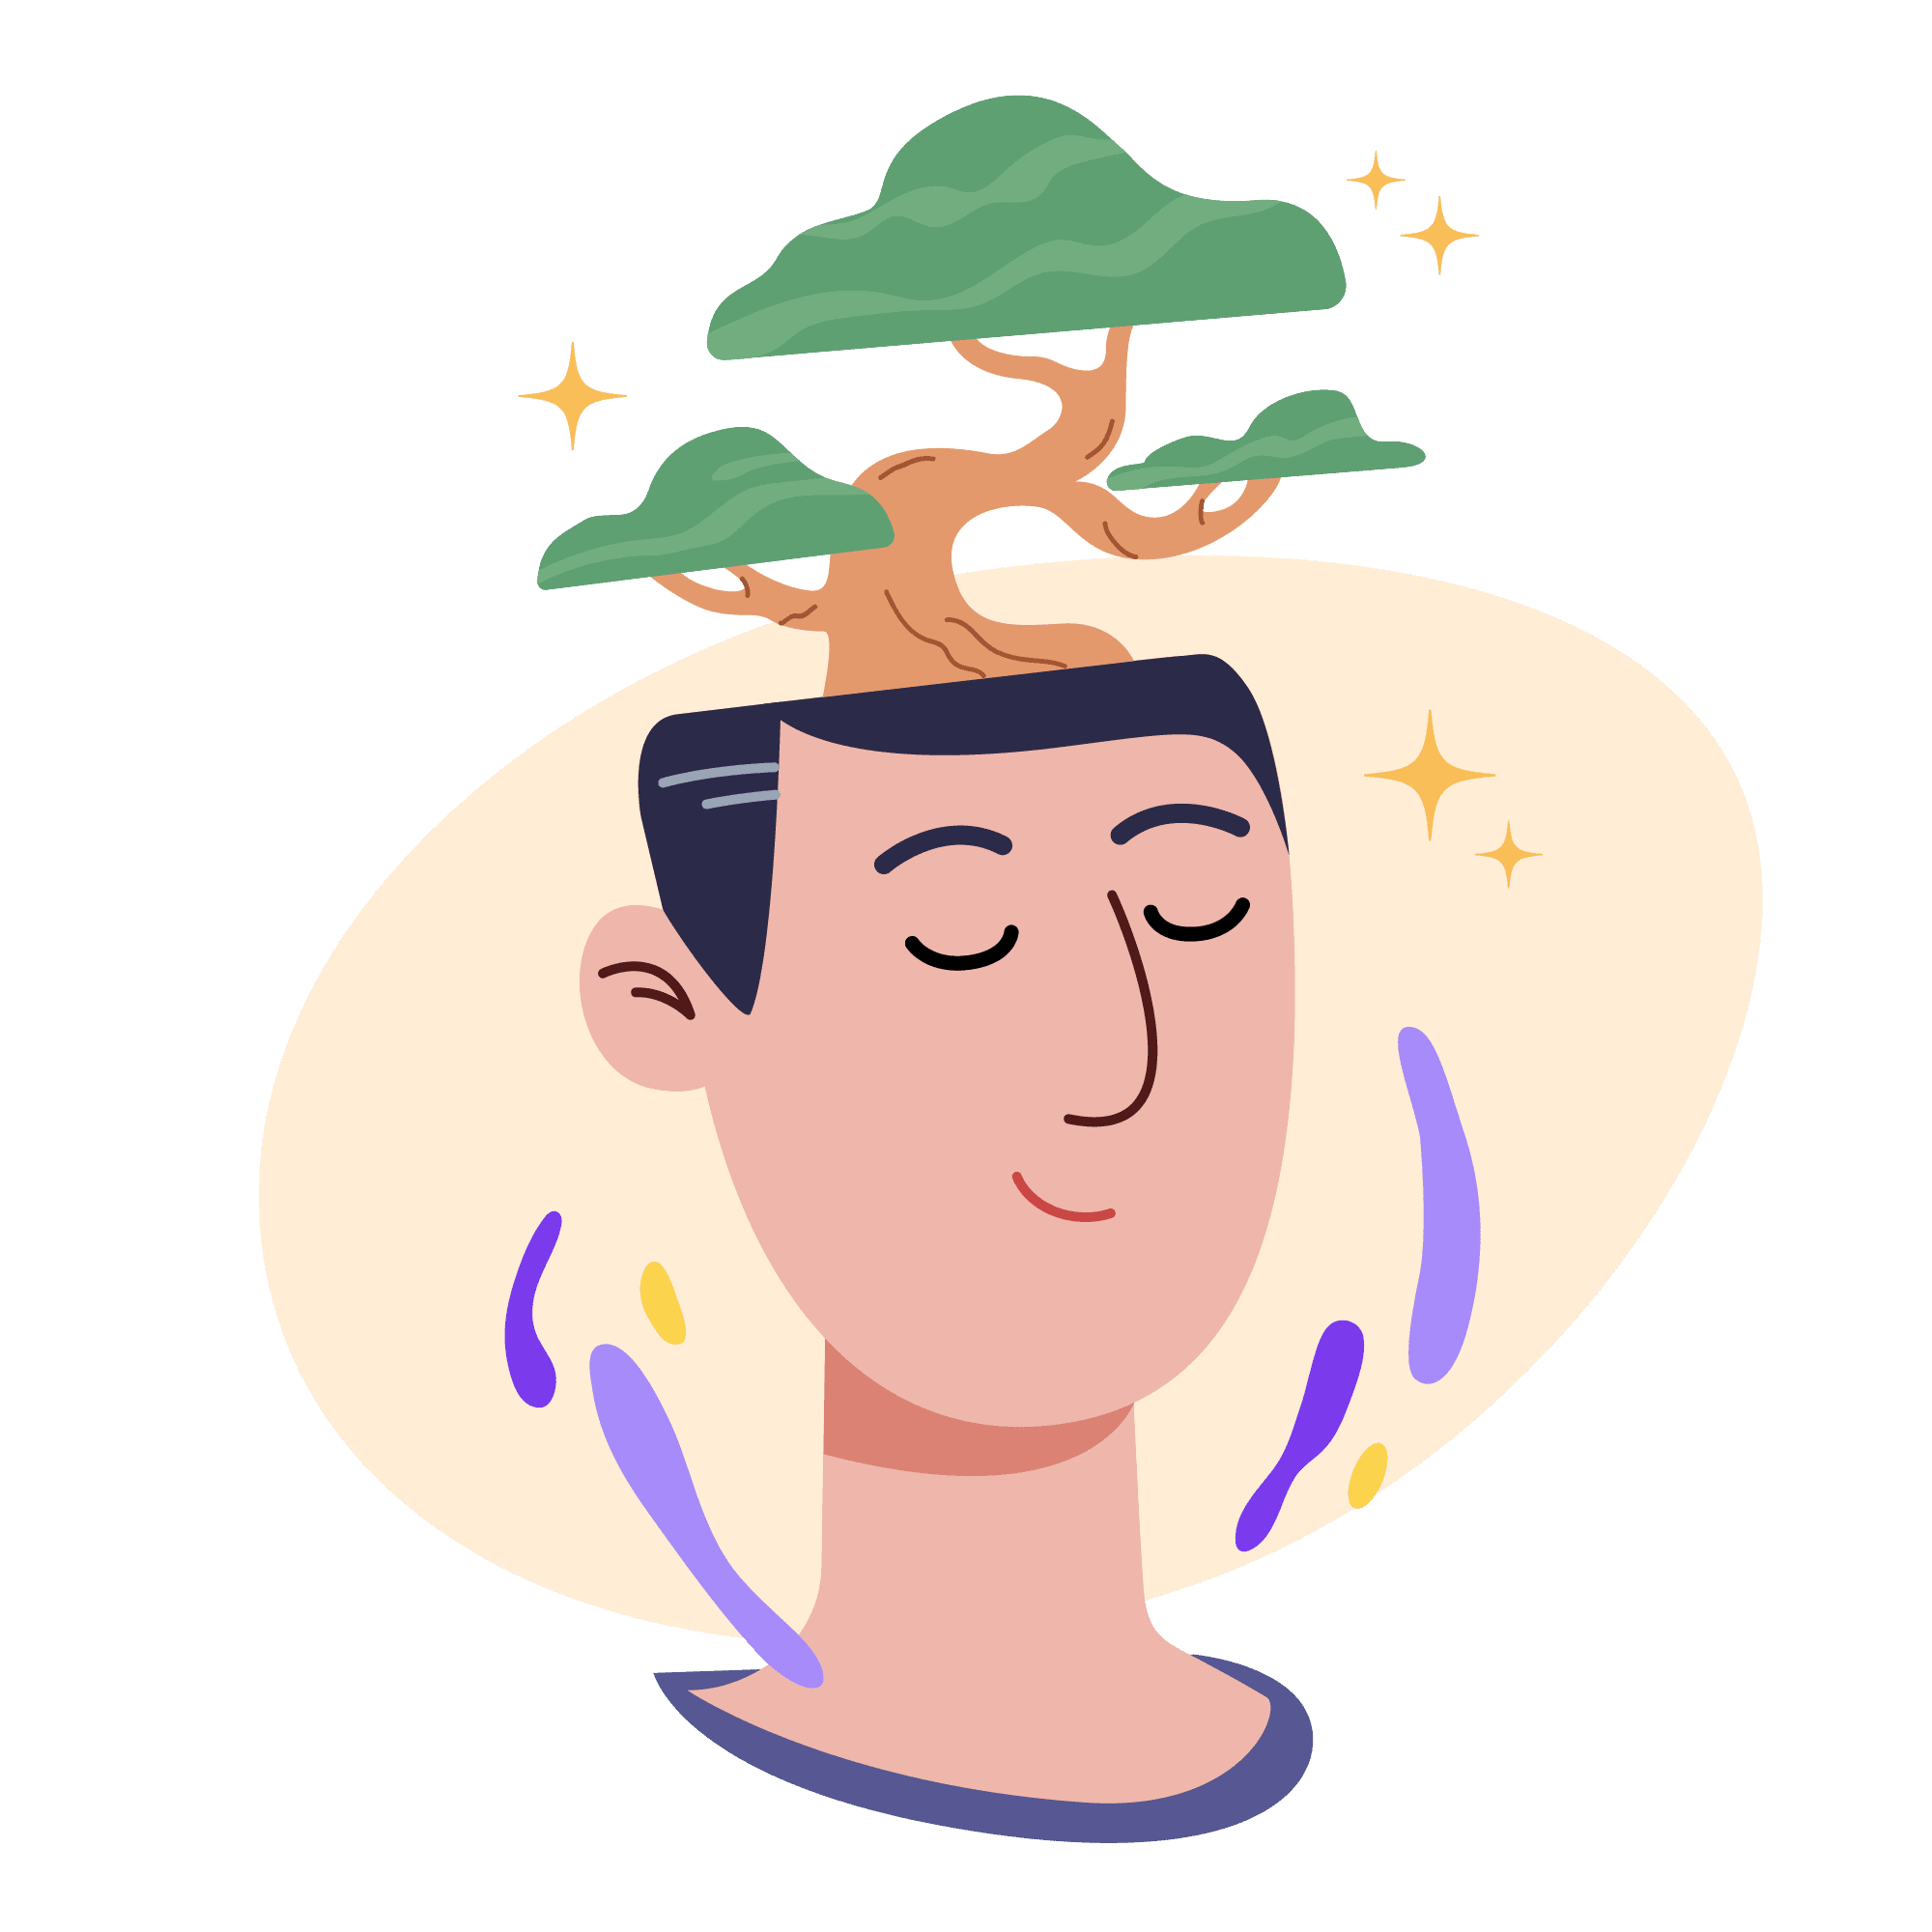 smiling person with tree growing on top